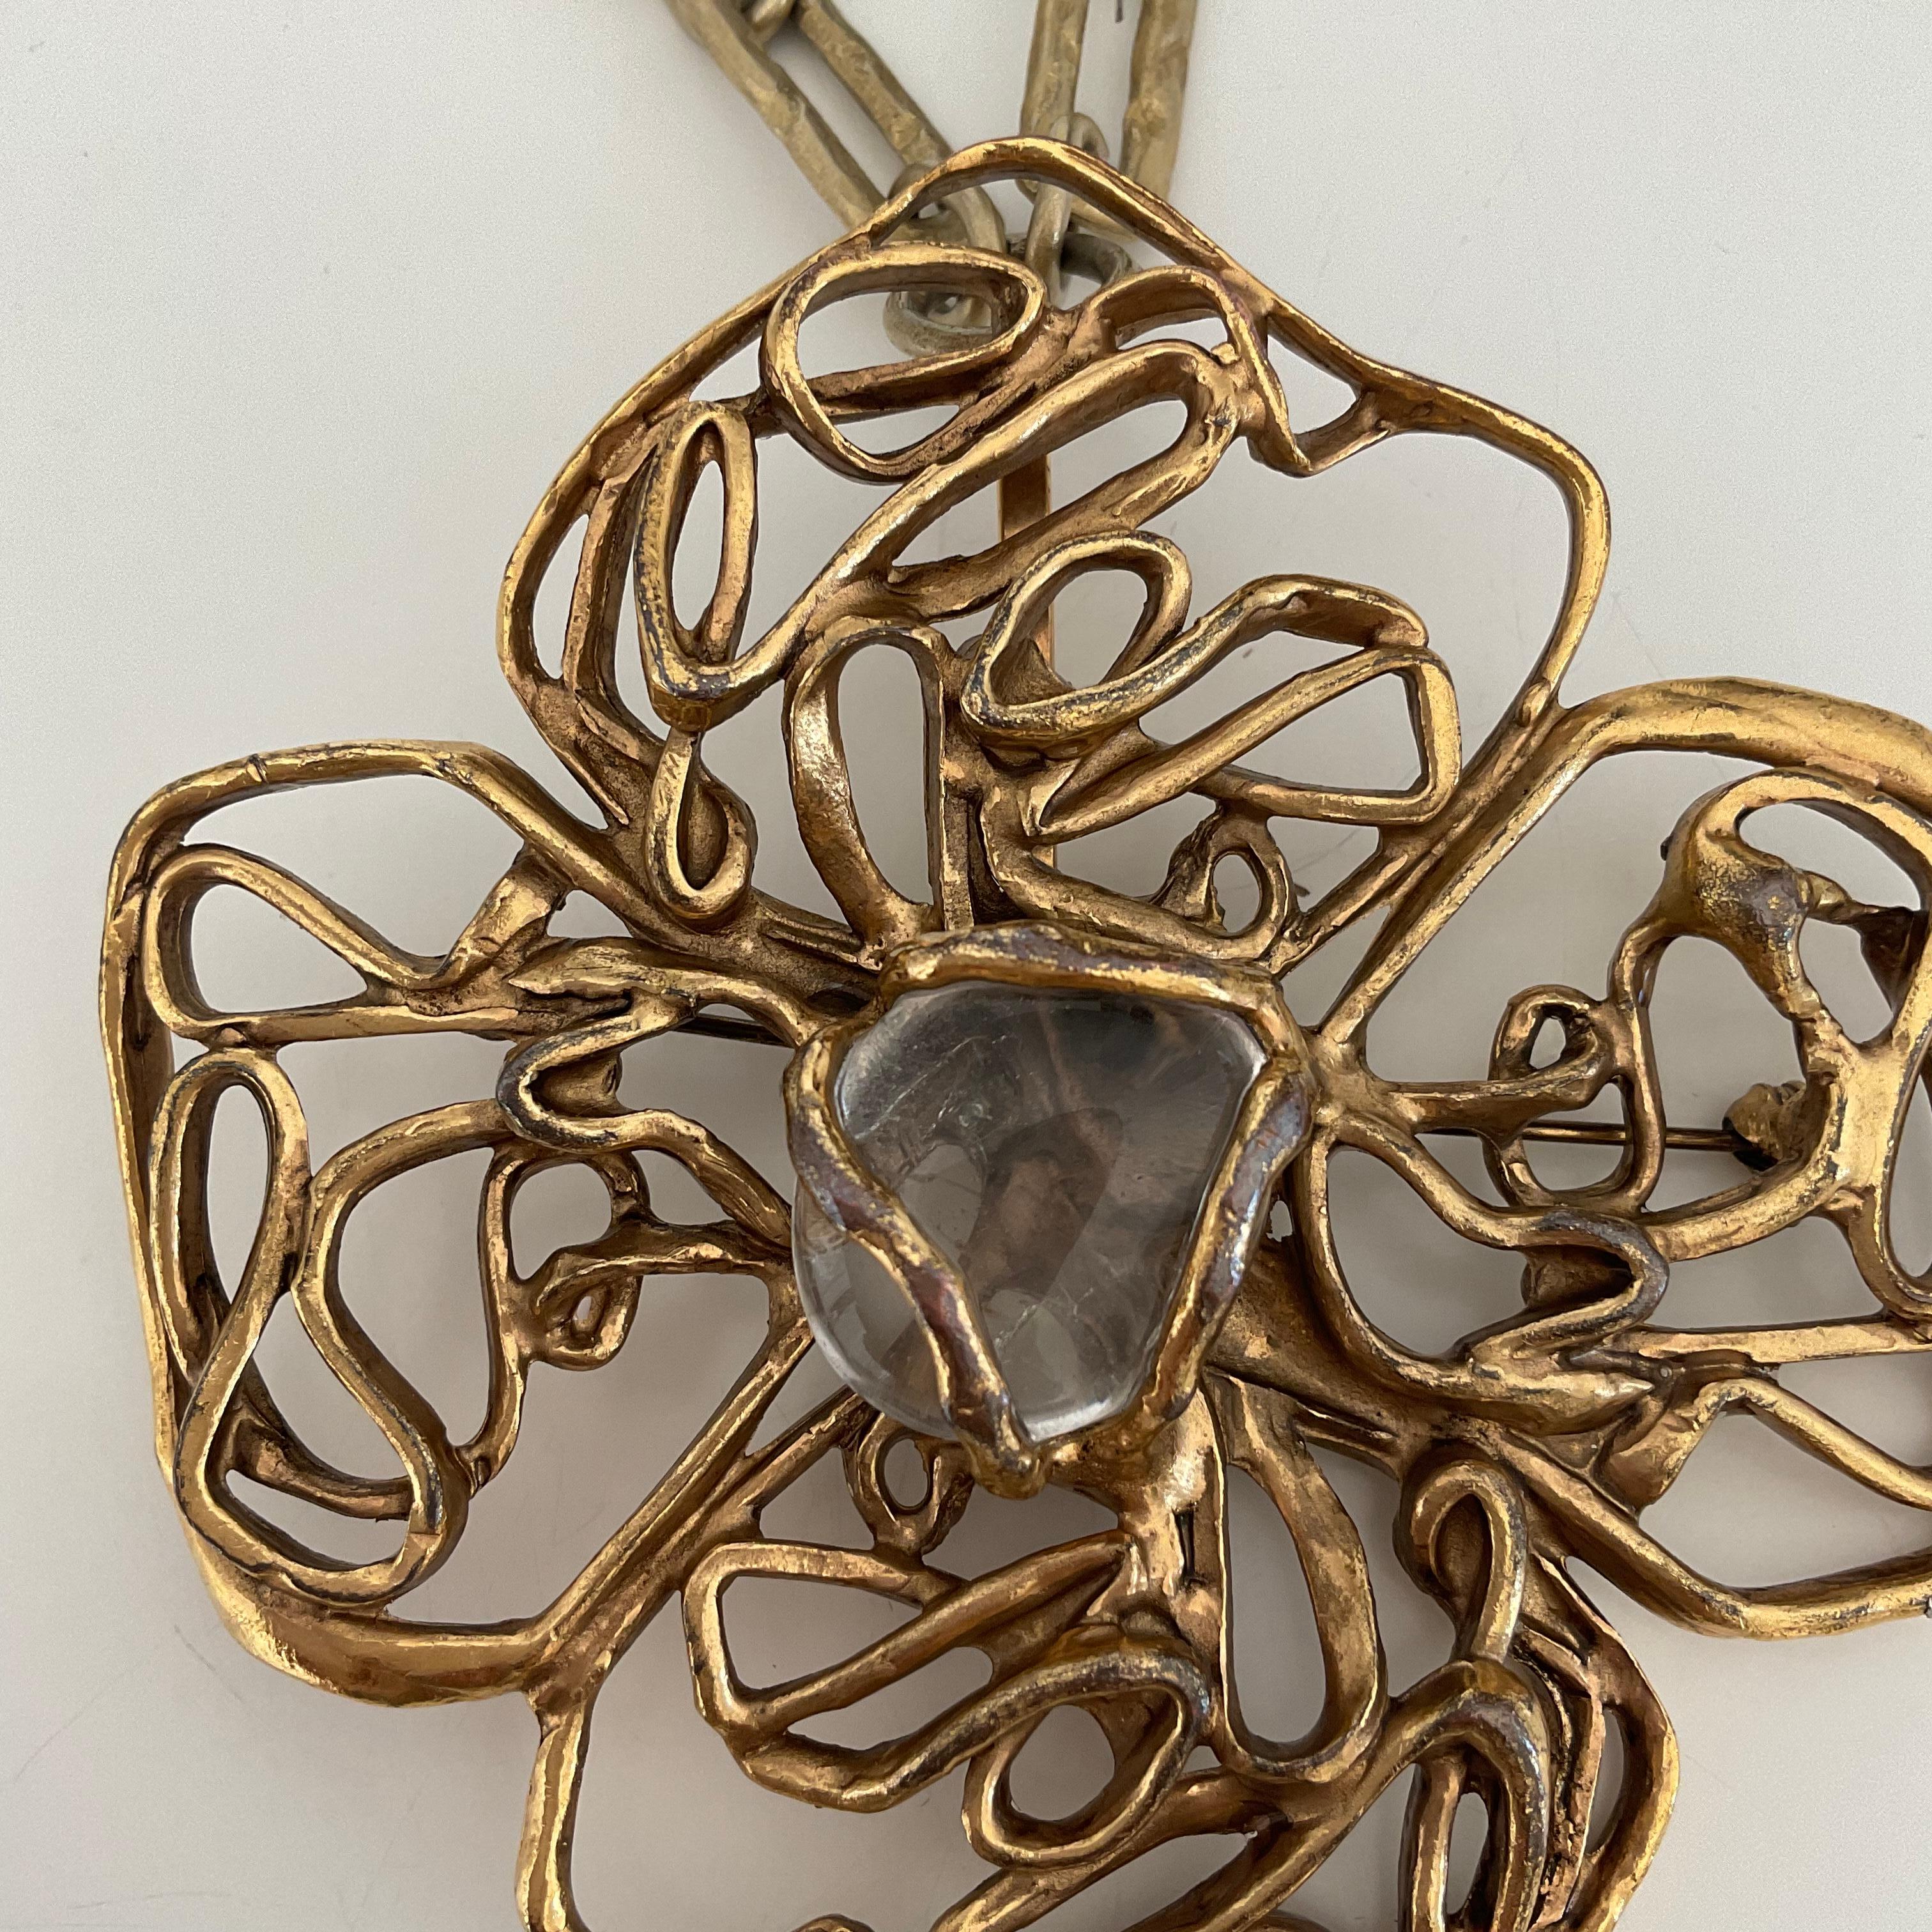 This original and one-of-a-kind brooch is a vintage piece from Yves Saint Laurent from the 70's. Gold-toned, it is designed as a flower, composed of four petals with wired chains/links, with a clear rock crystal at the centre. The brooch becomes a